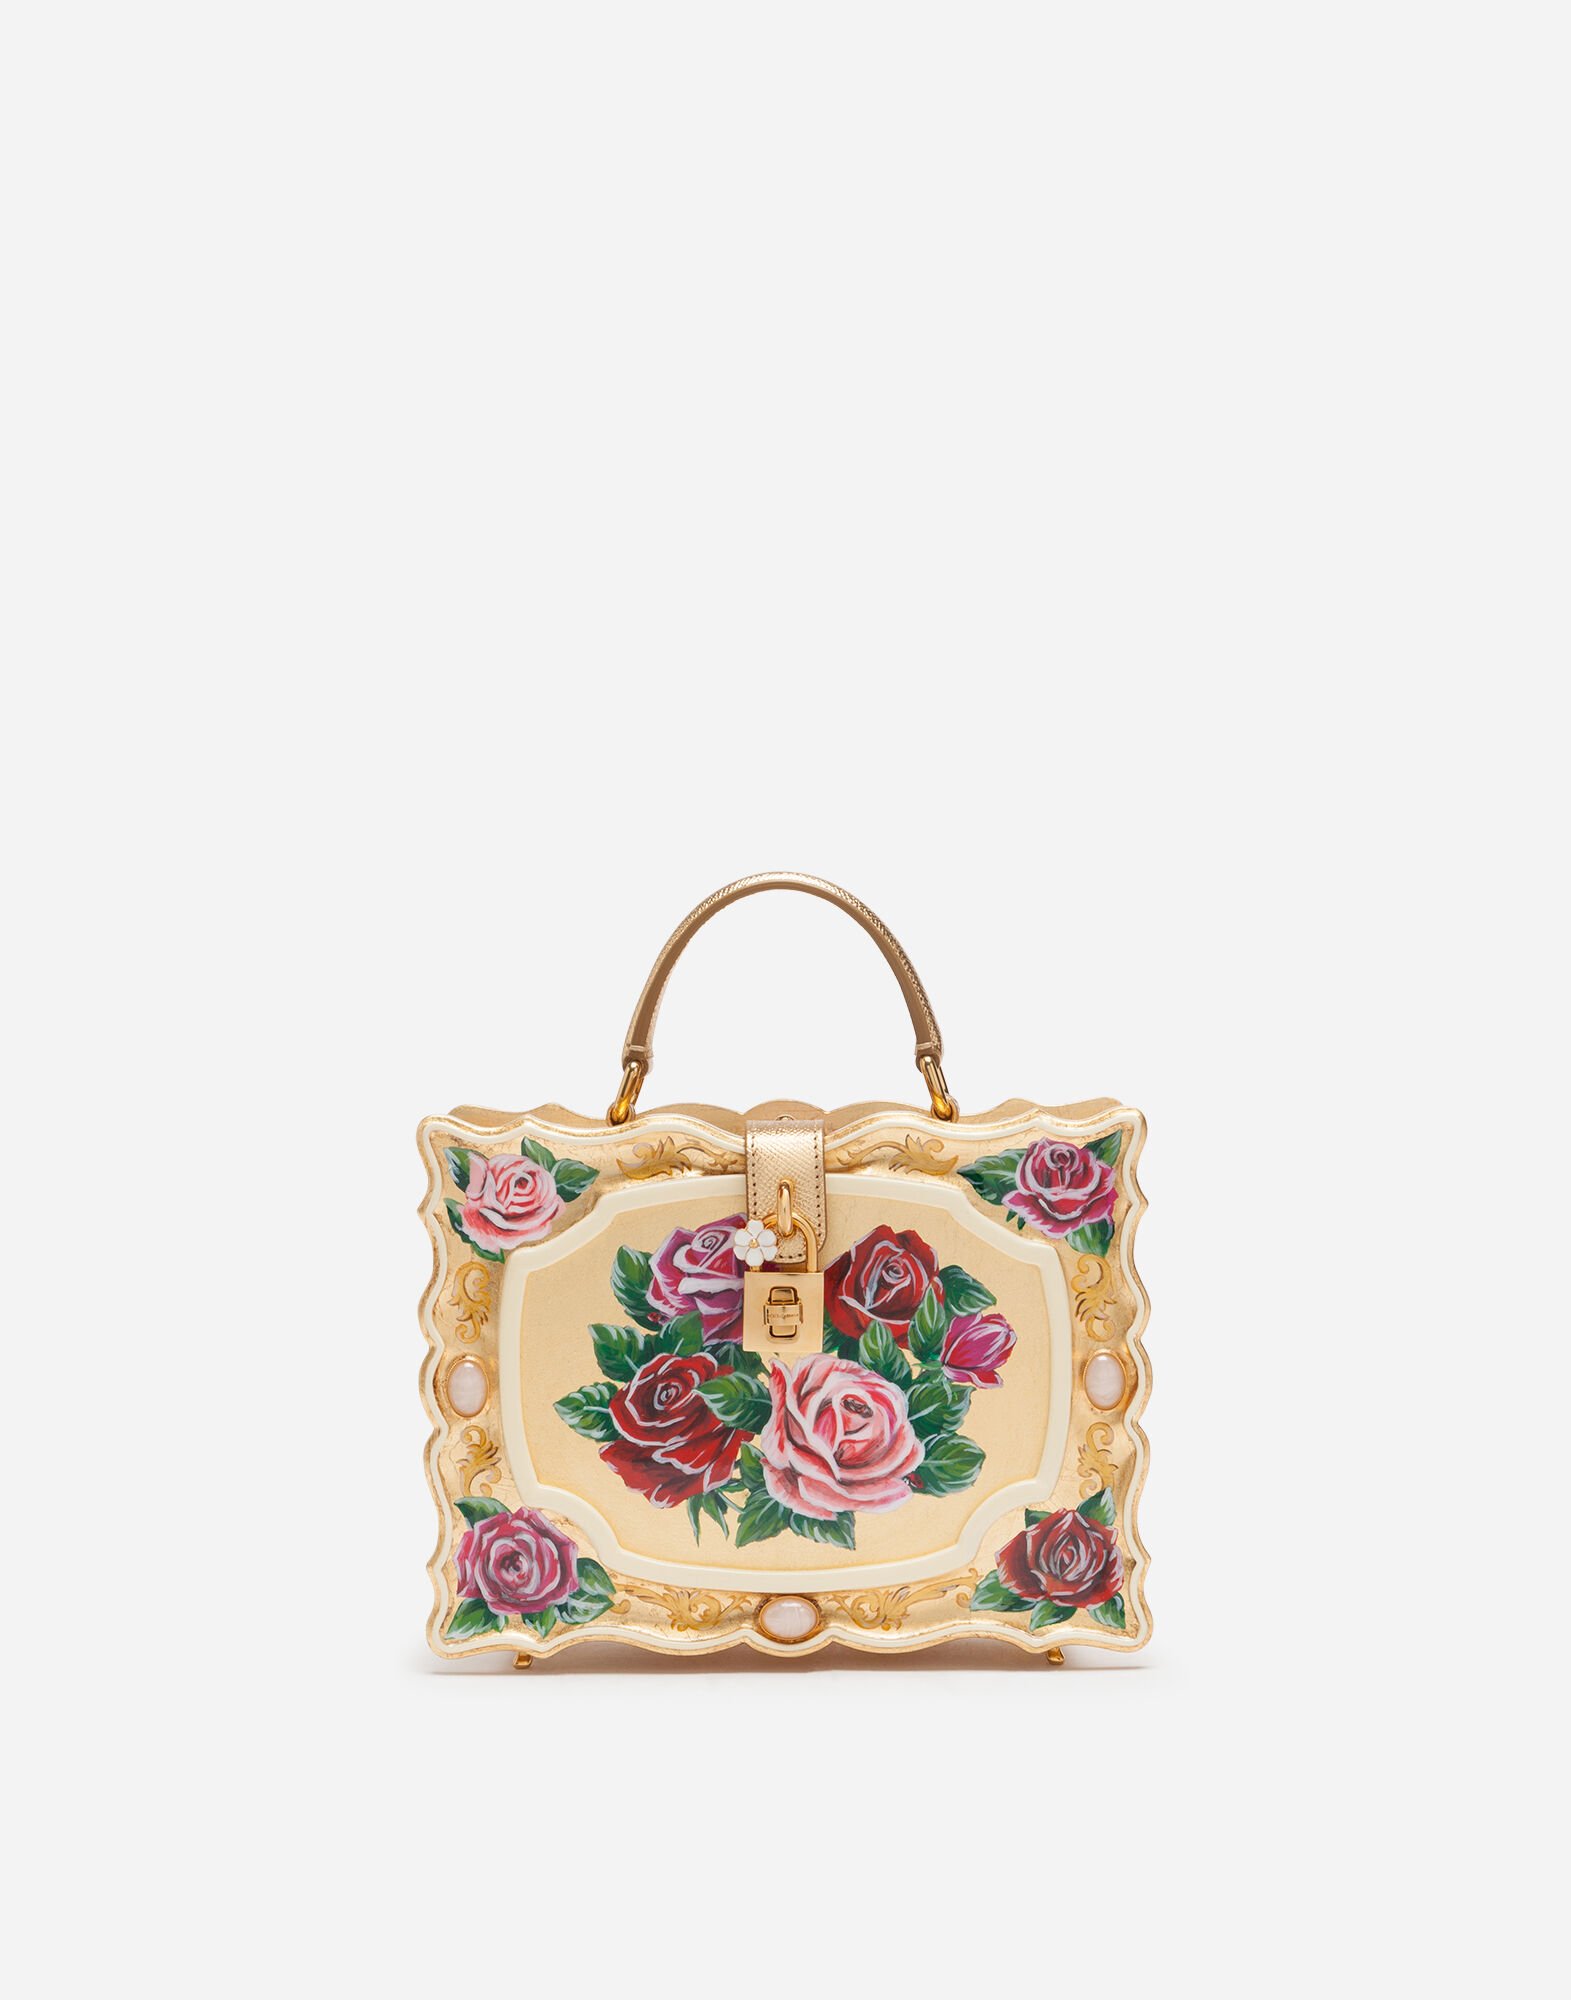 Dolce & Gabbana Dolce Box bag in golden hand-painted wood Red BB6002A1001